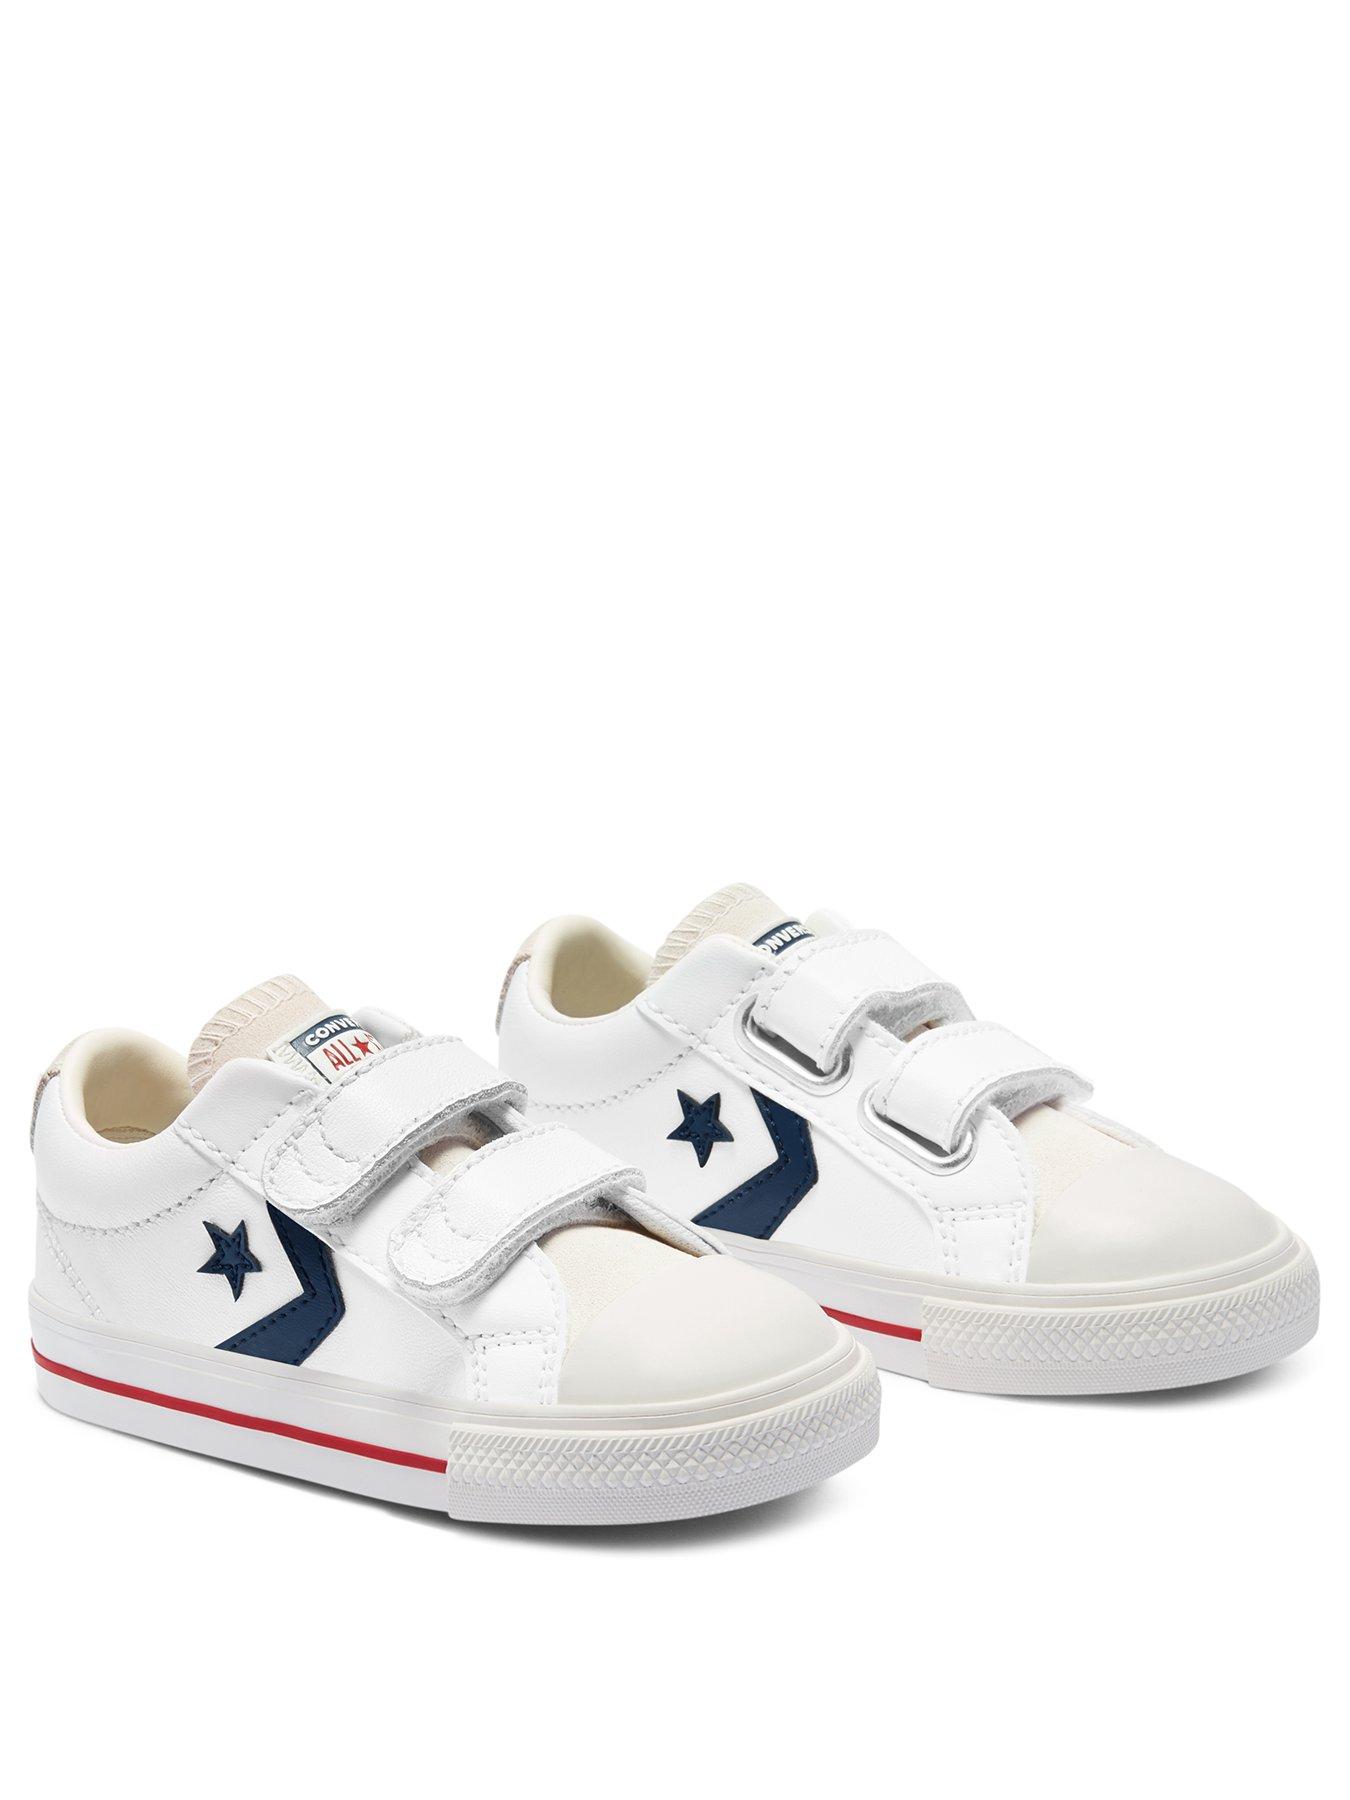 converse star player ev ox trainers